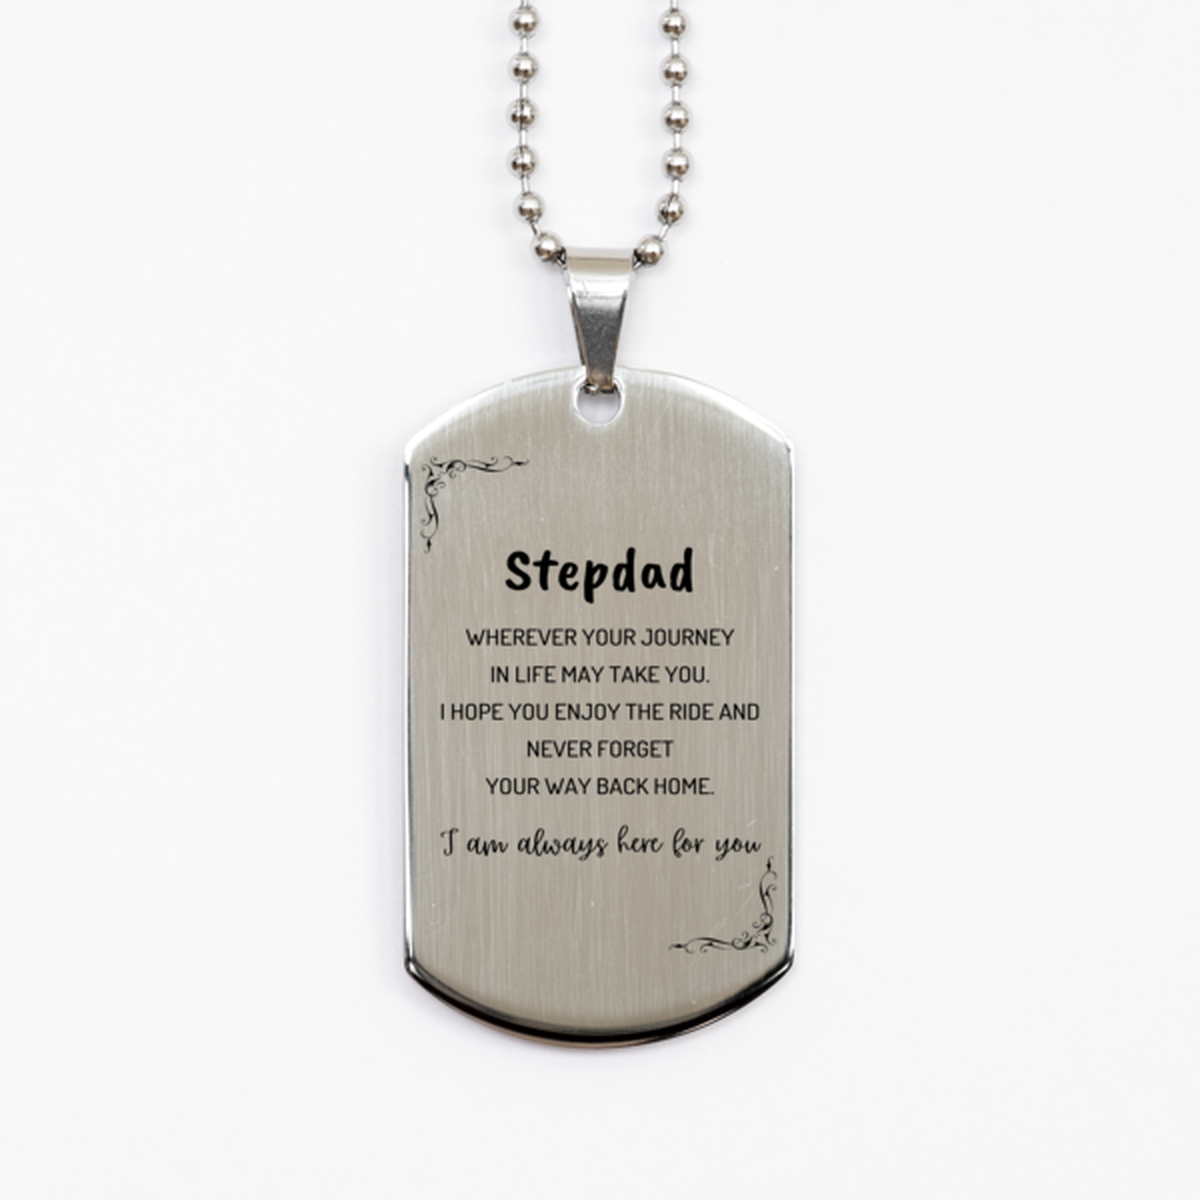 Stepdad wherever your journey in life may take you, I am always here for you Stepdad Silver Dog Tag, Awesome Christmas Gifts For Stepdad, Stepdad Birthday Gifts for Men Women Family Loved One